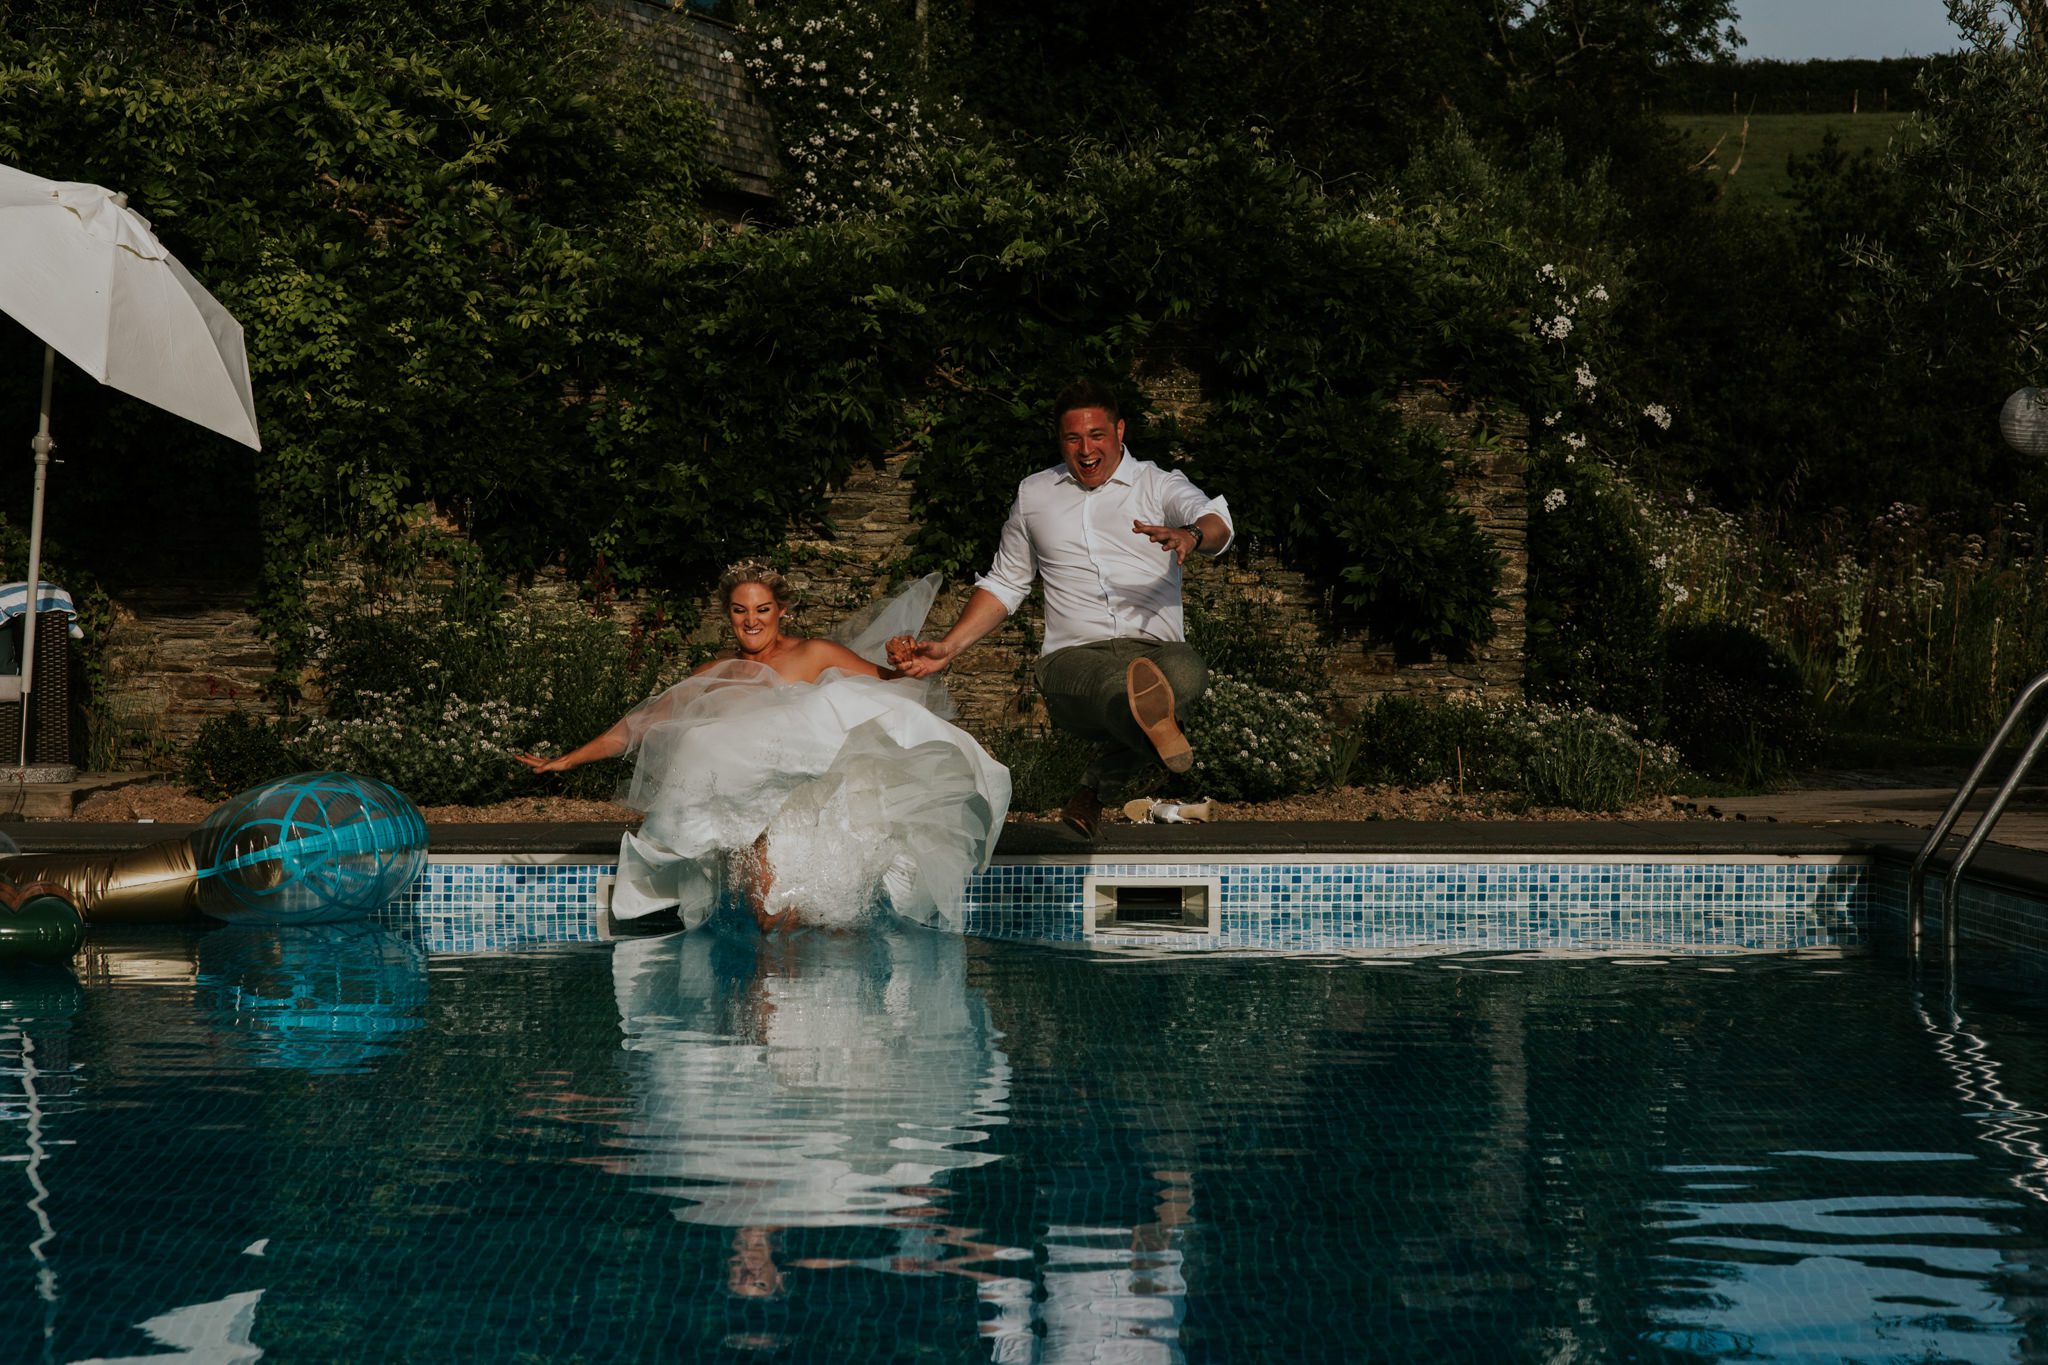 Bride and groom jimp into swimming pool after their wedding